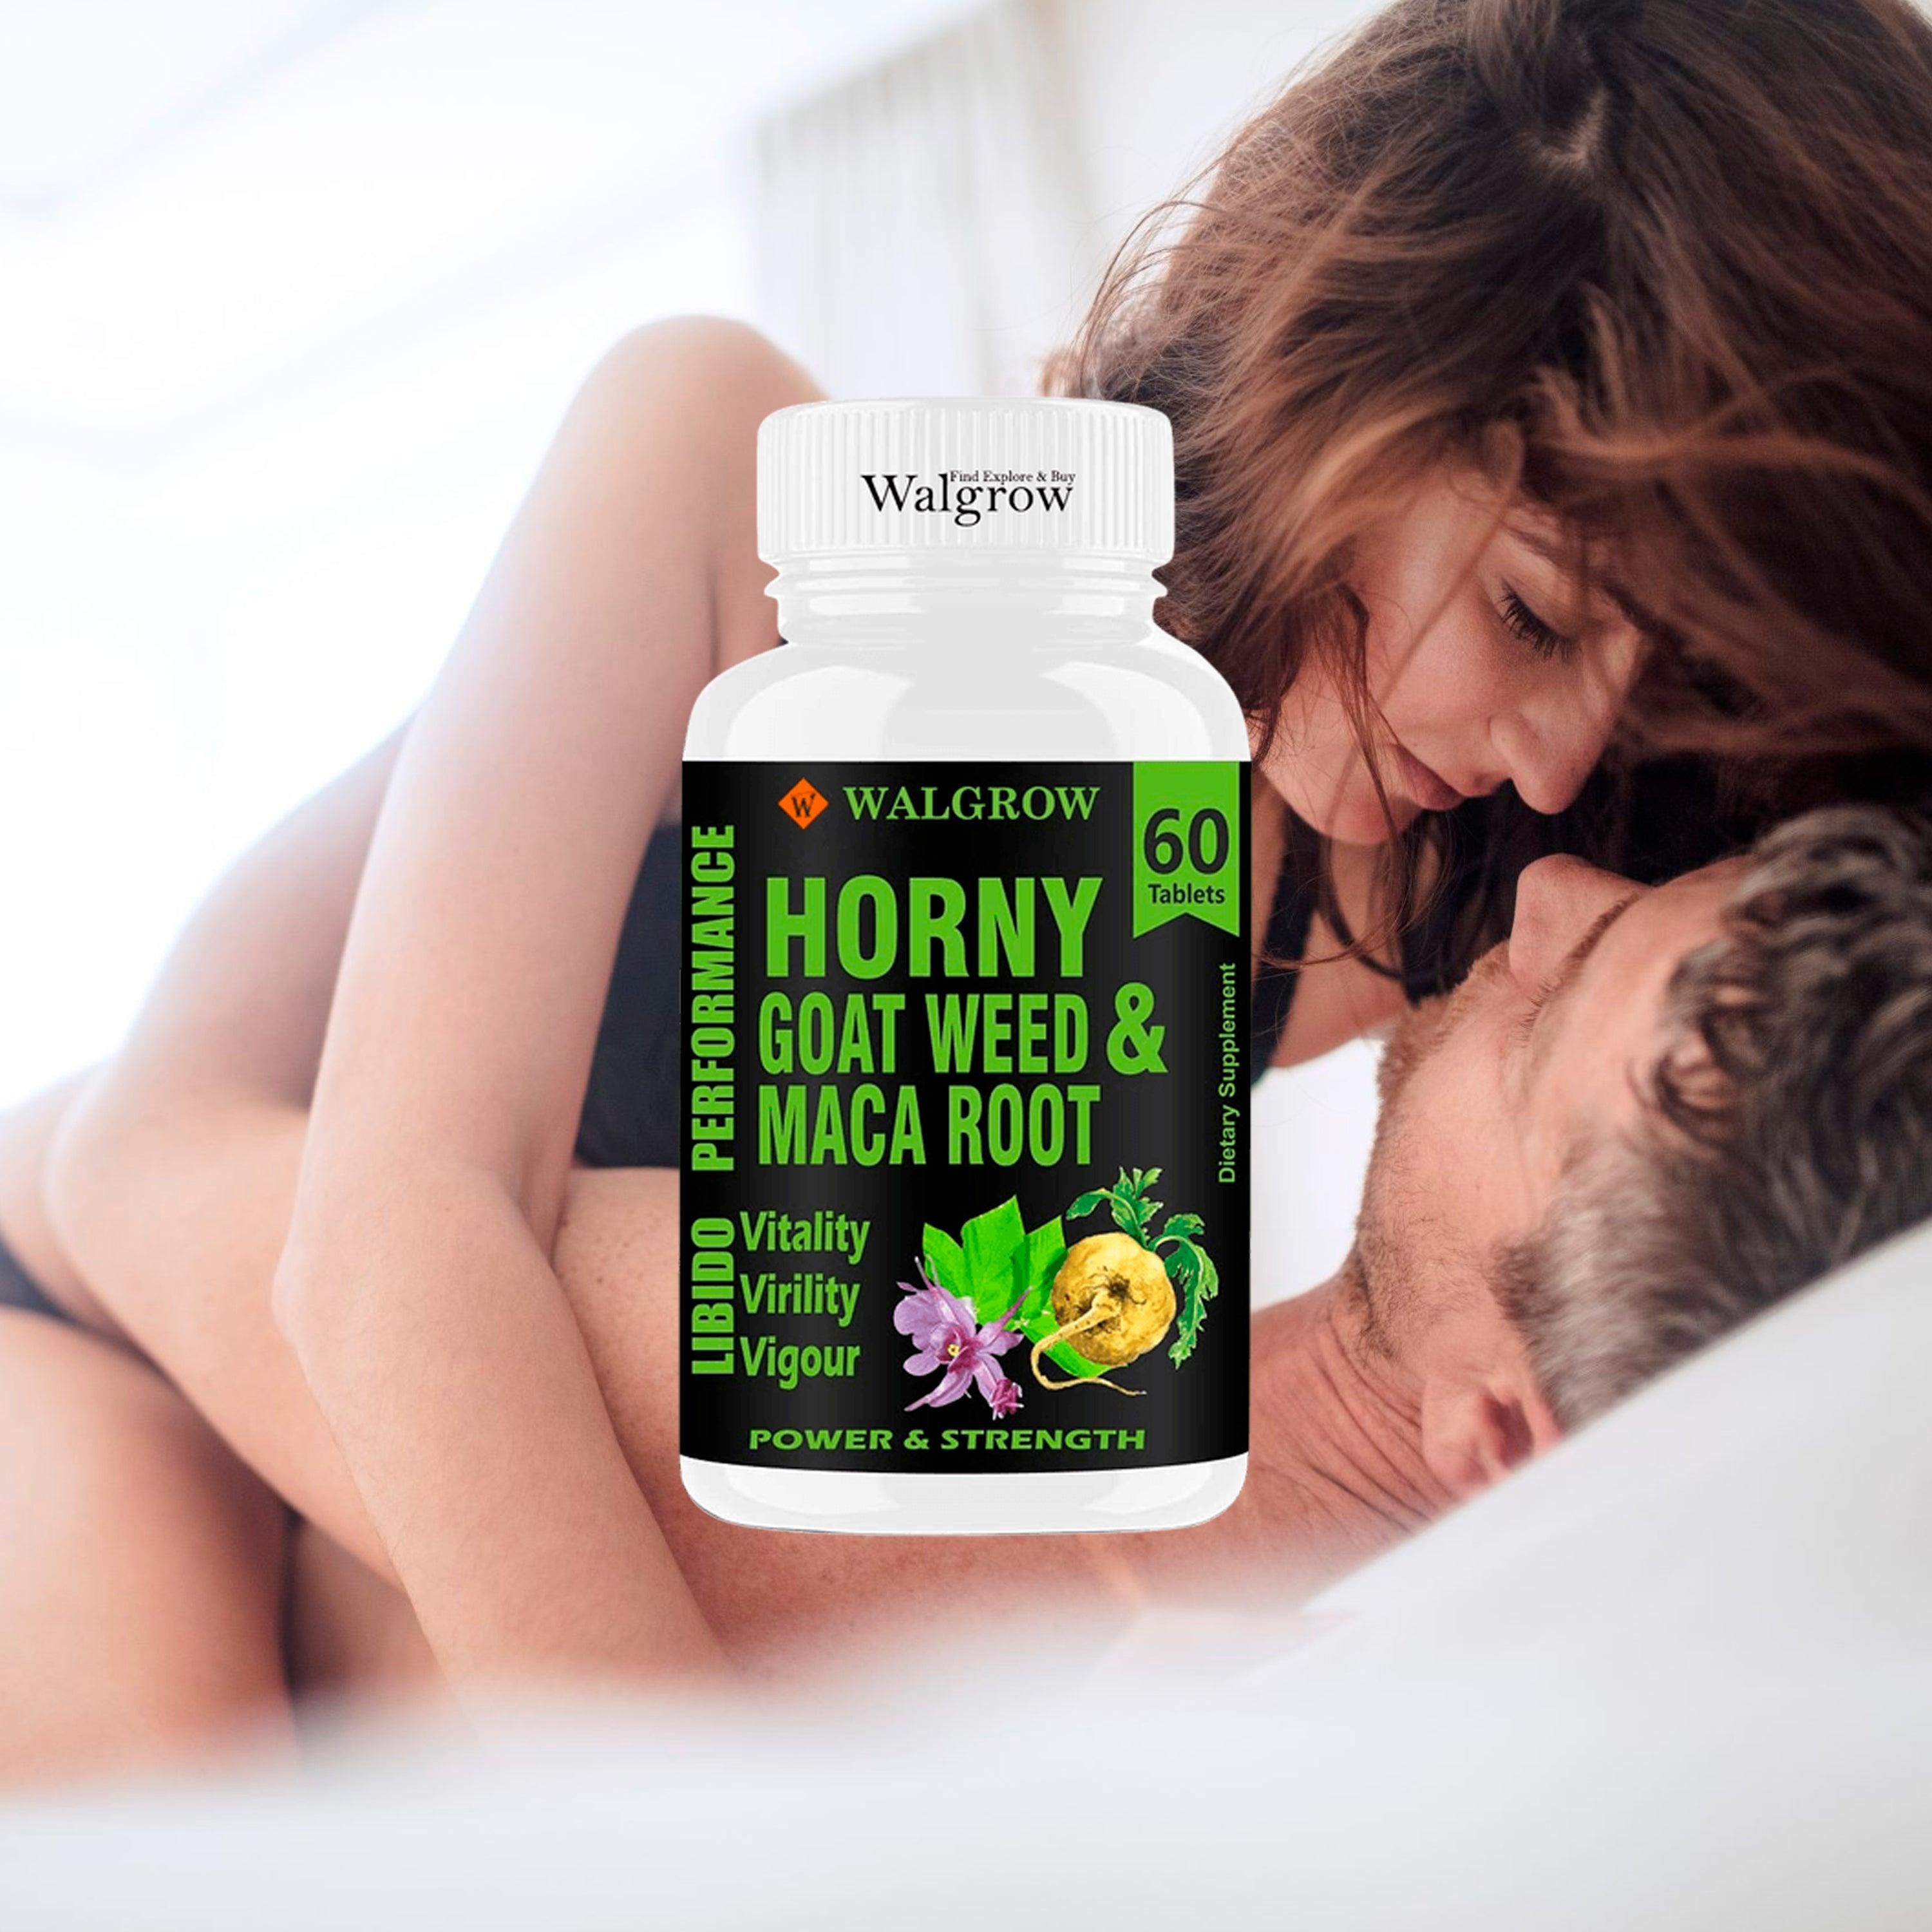 Horny Goat Weed and Maca Root For Men's/Male Sexual Enhancer & Testosterone Booster (1000mg, 1 Bottle 60 Tablets) - Walgrow.com